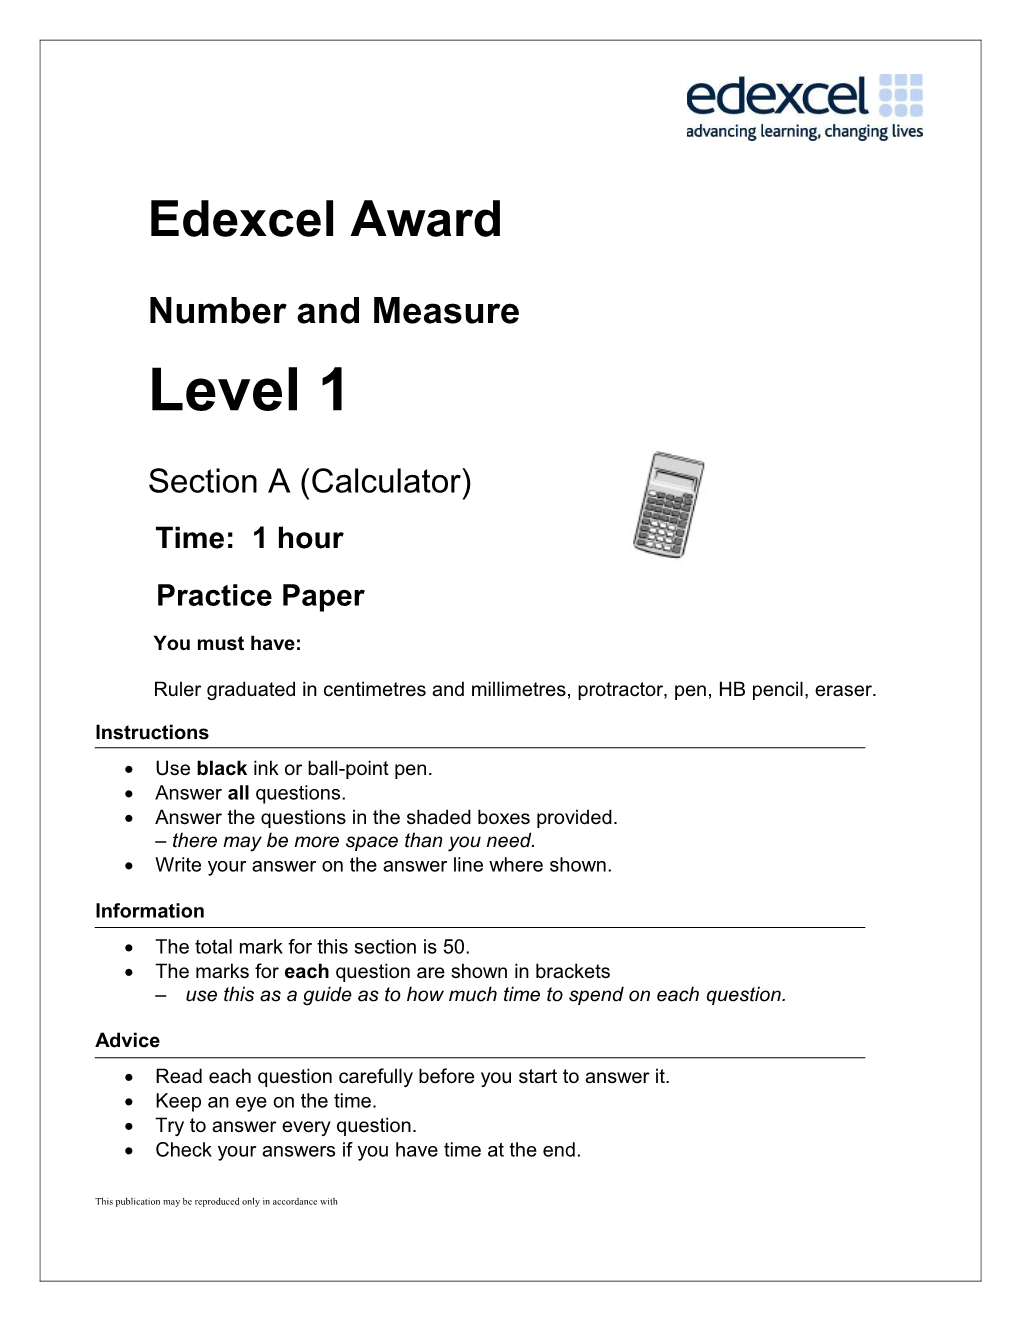 Level 1 Number and Measure Practice Paper